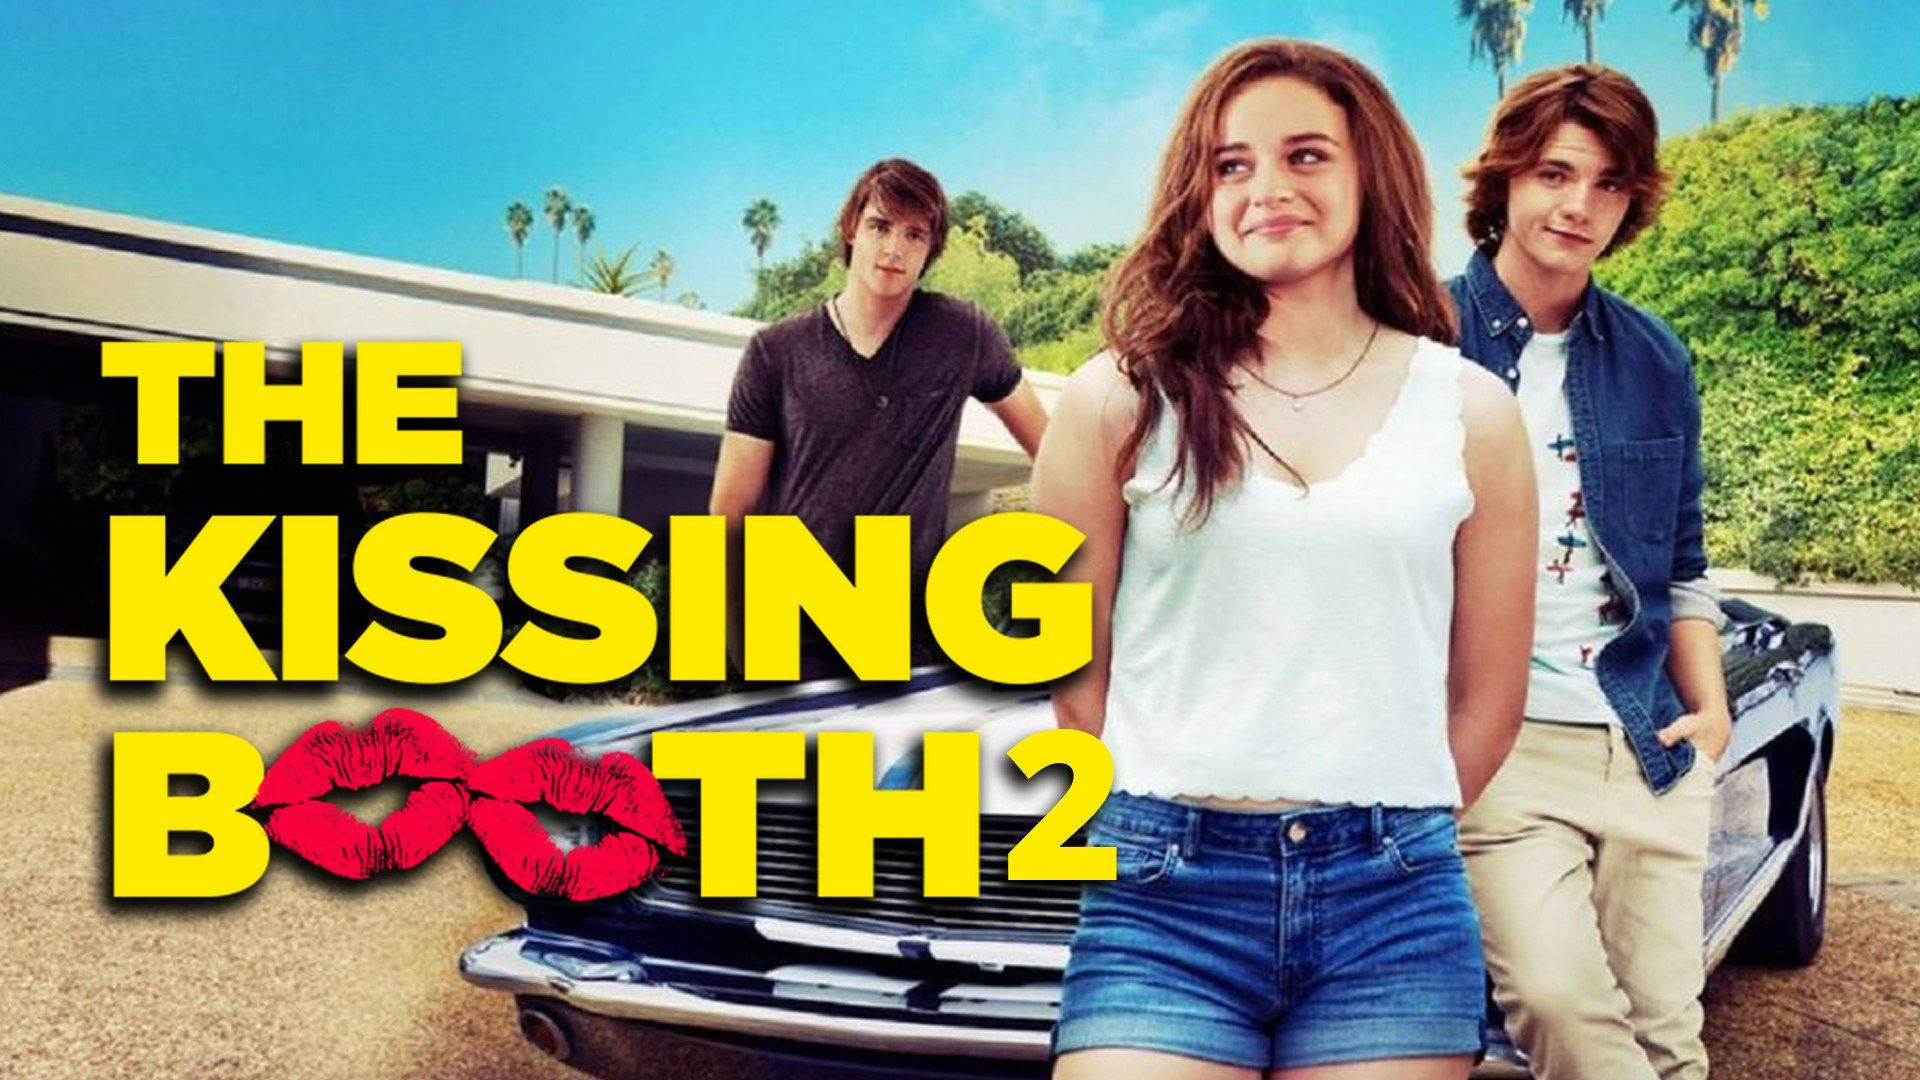 The Kissing Booth 2 Movie Poster Wallpaper